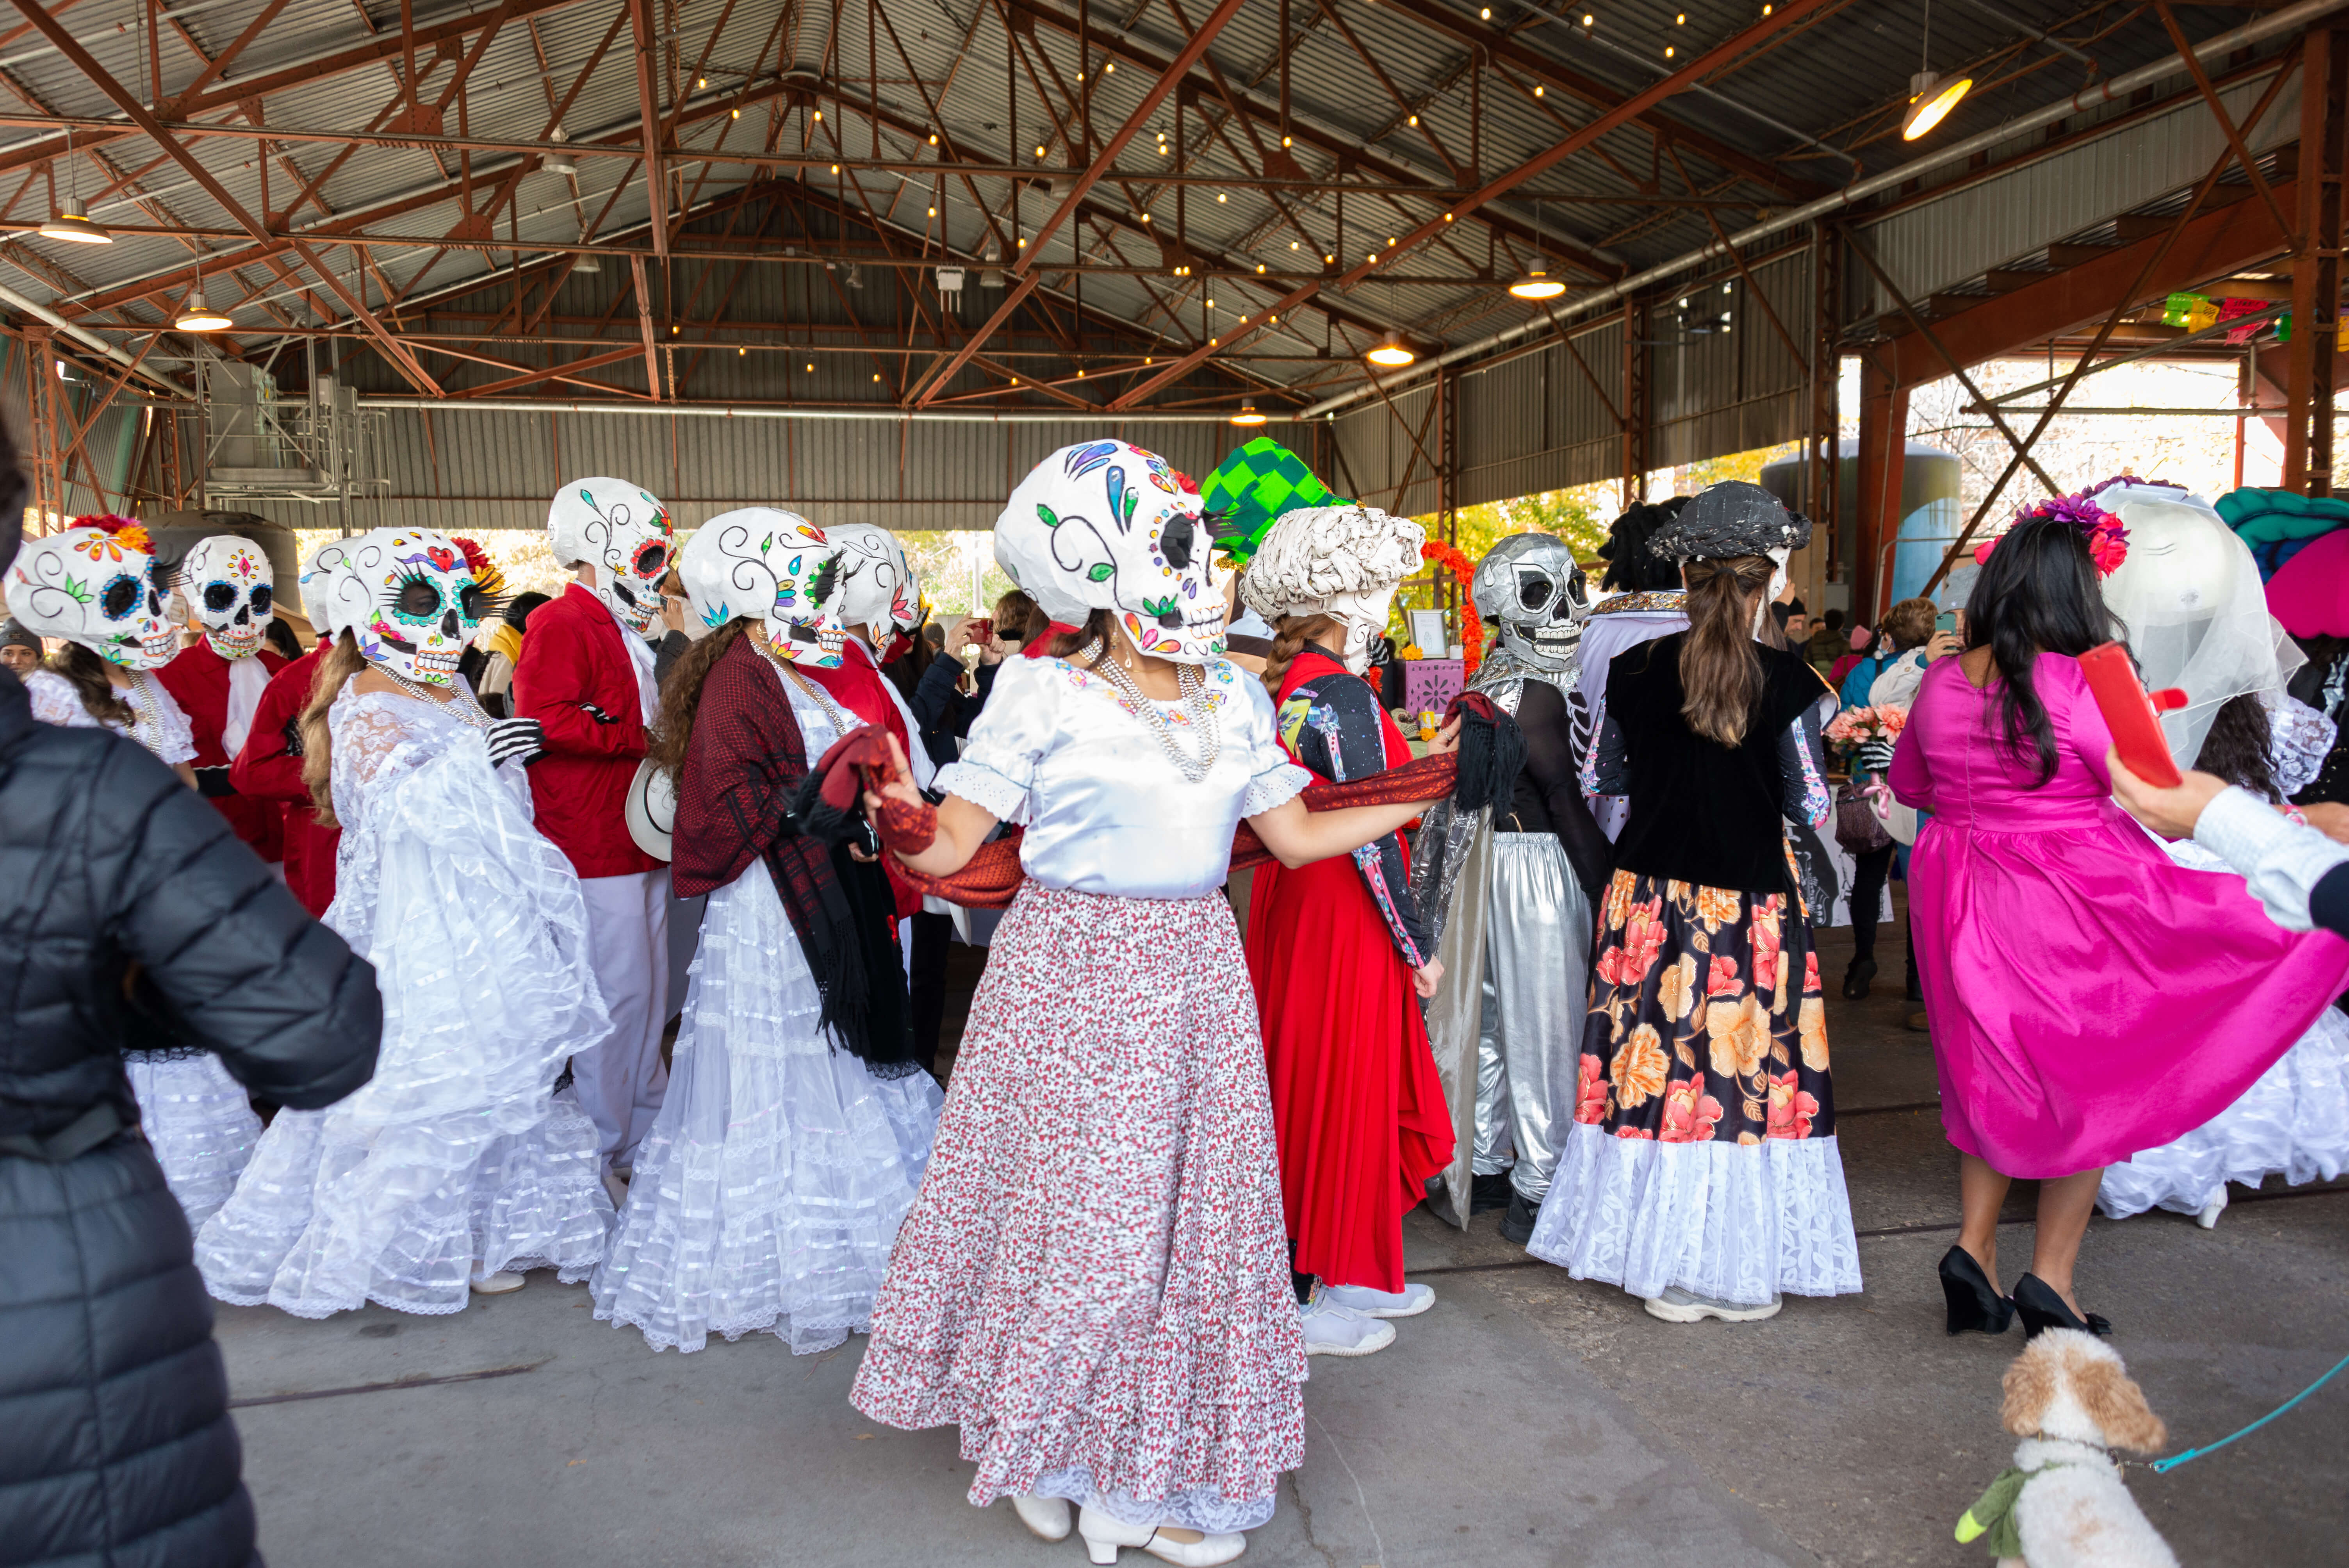 People dance in costumes at the Day of the Dead celebrations at Evergreen Brick Works